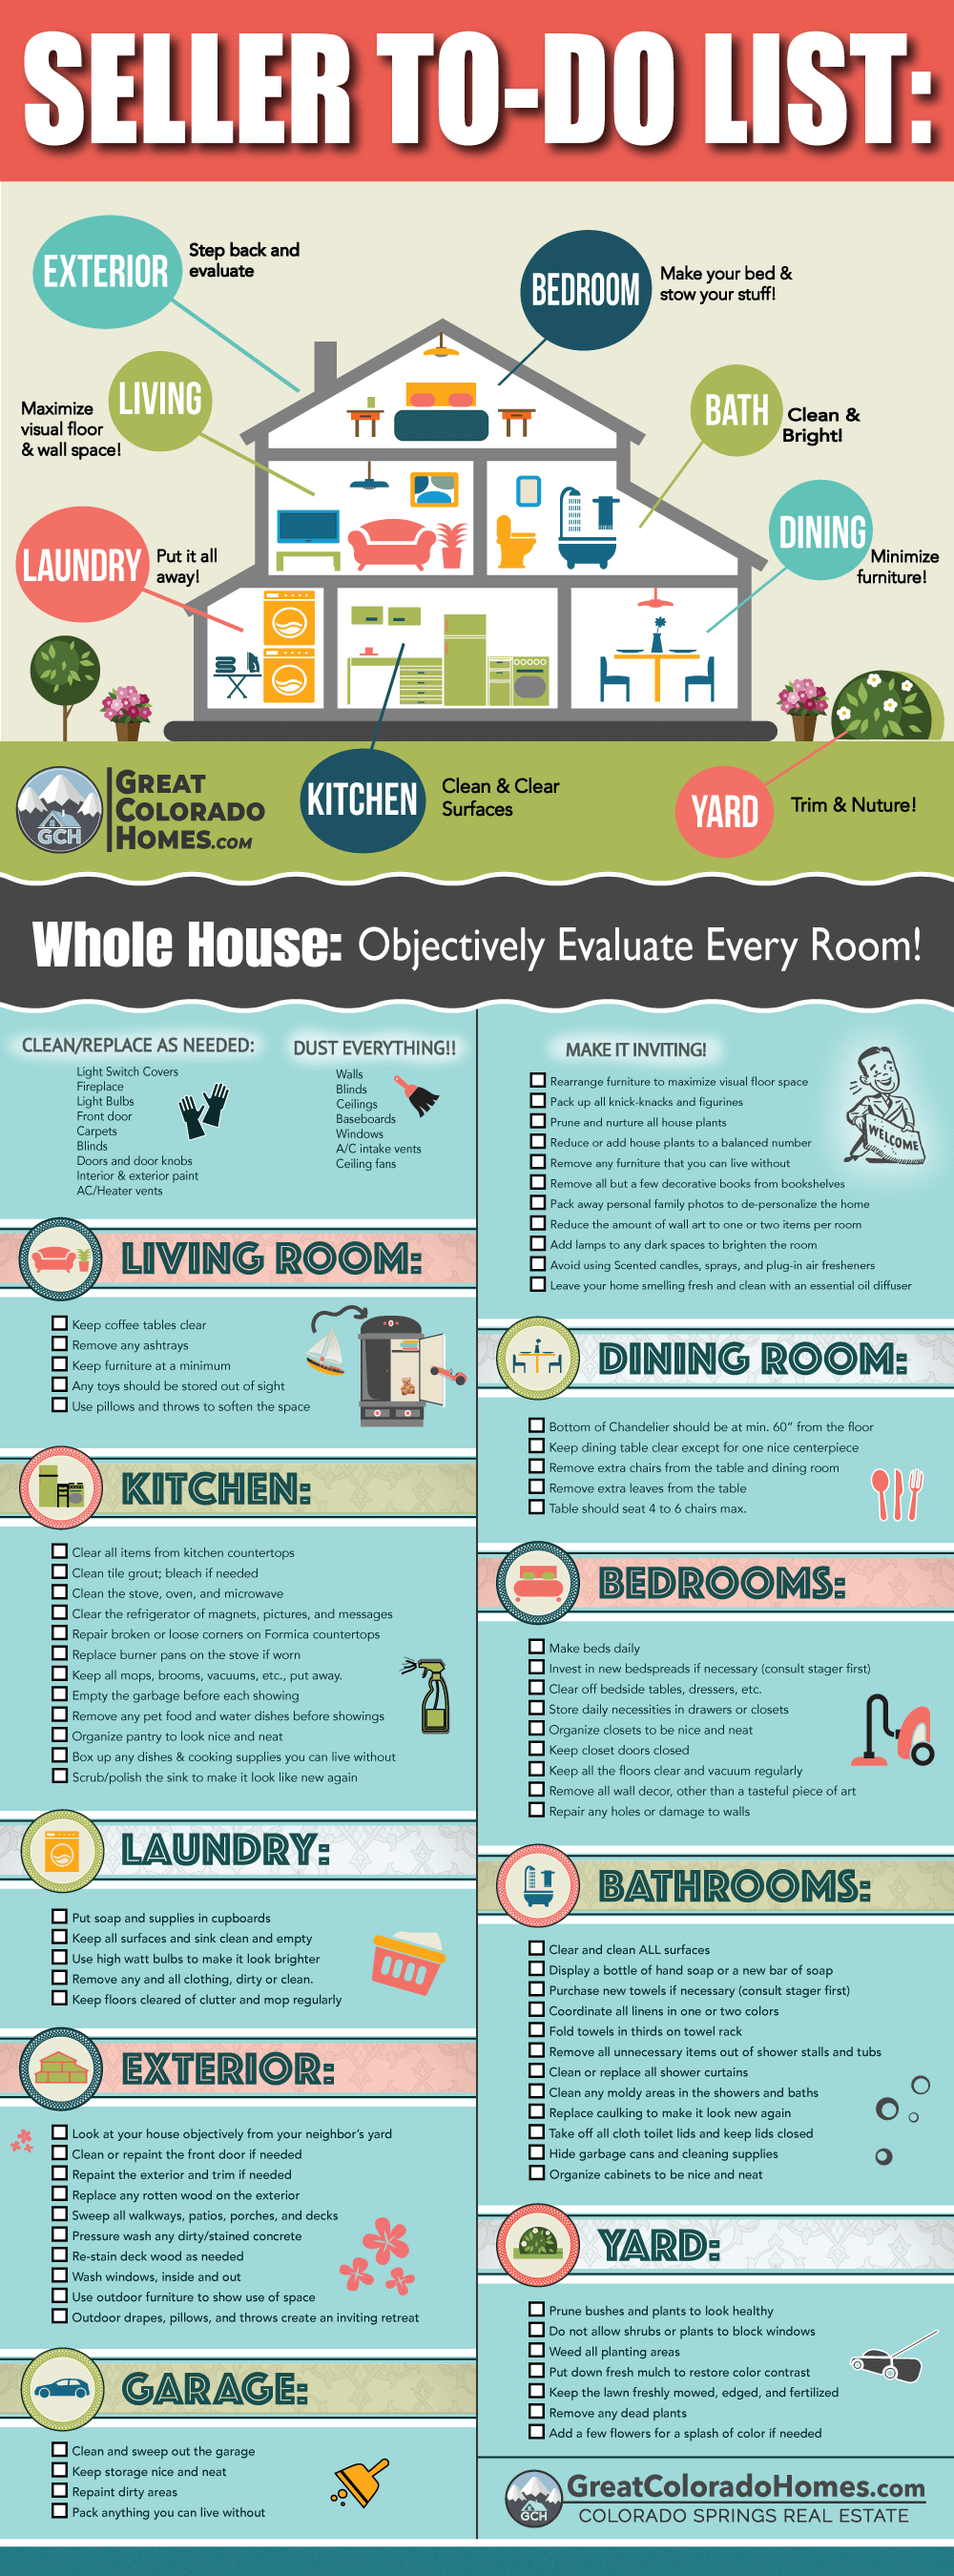 The Ultimate Home Sellers Checklist Guide - Get Your House Ready to Sell